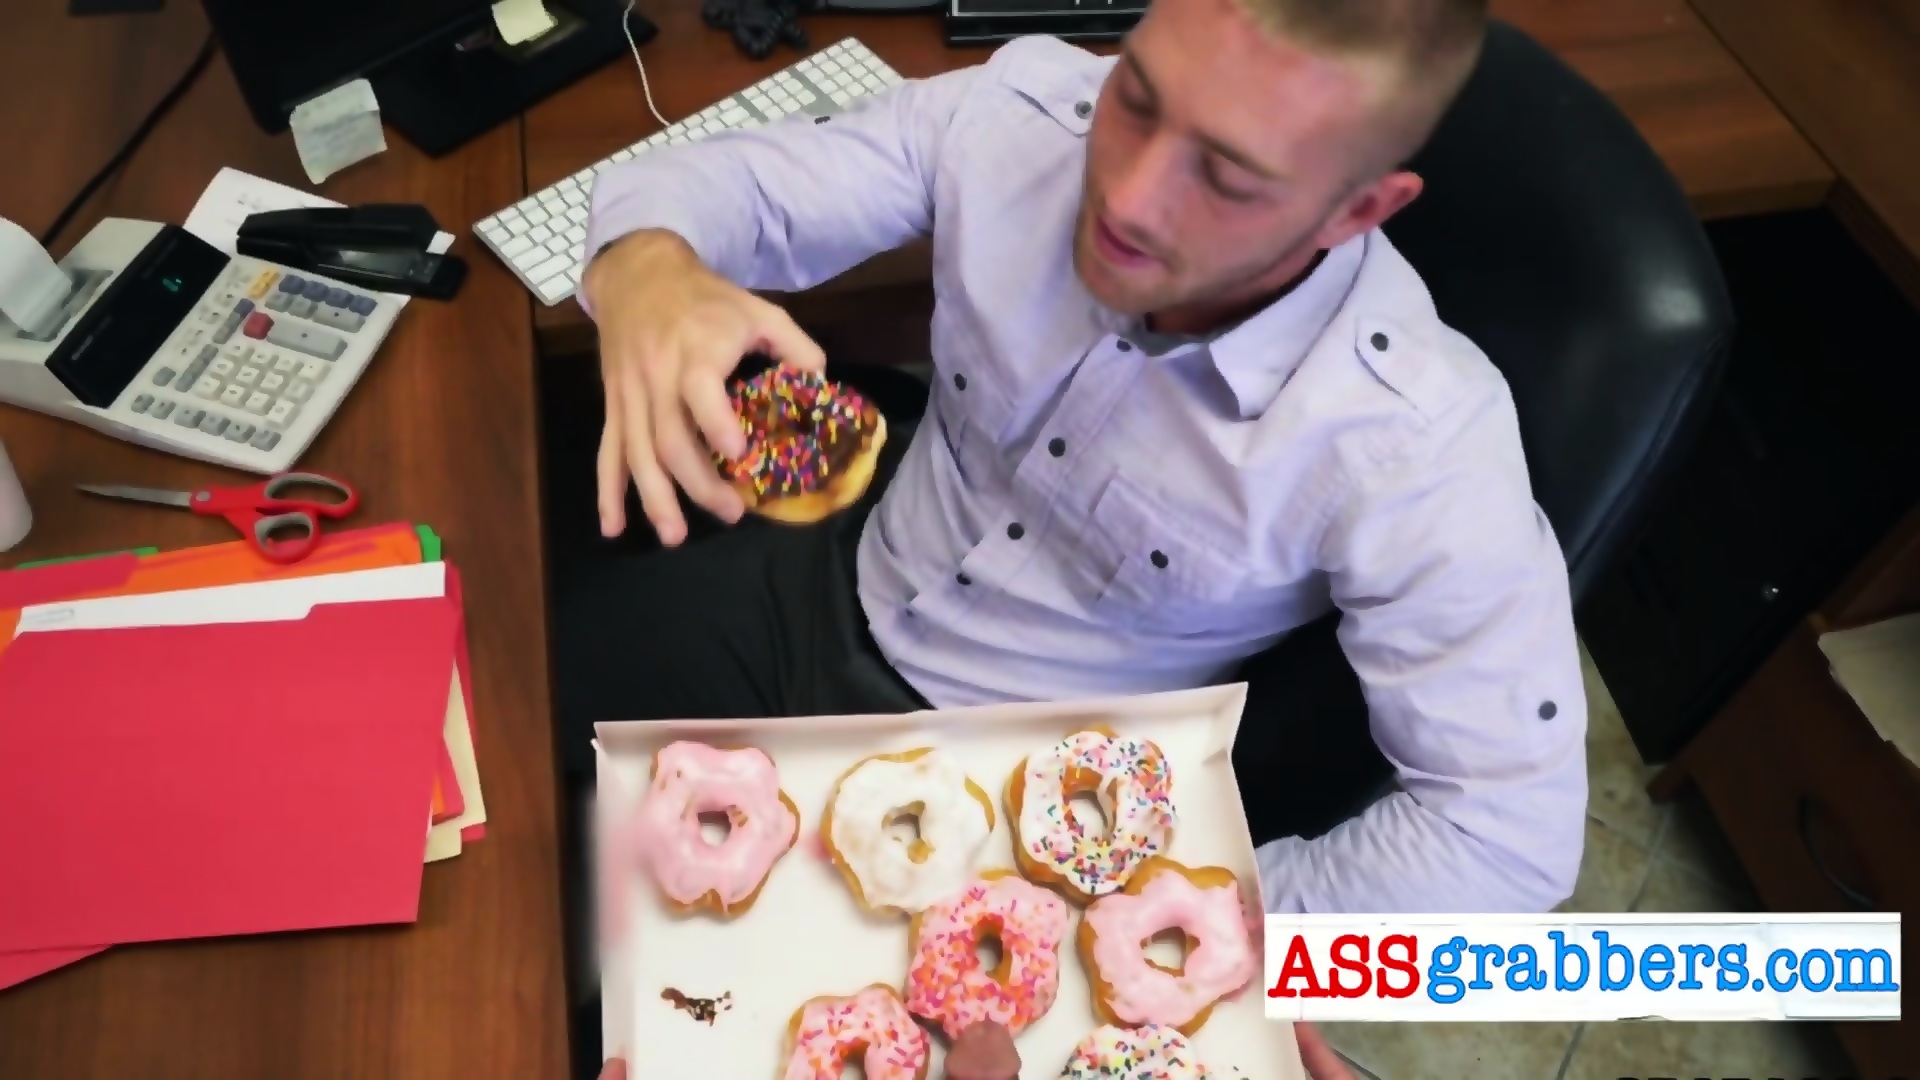 Boss Pranks His Horny Assistant With Some Sexy Donuts With His Big Dick On